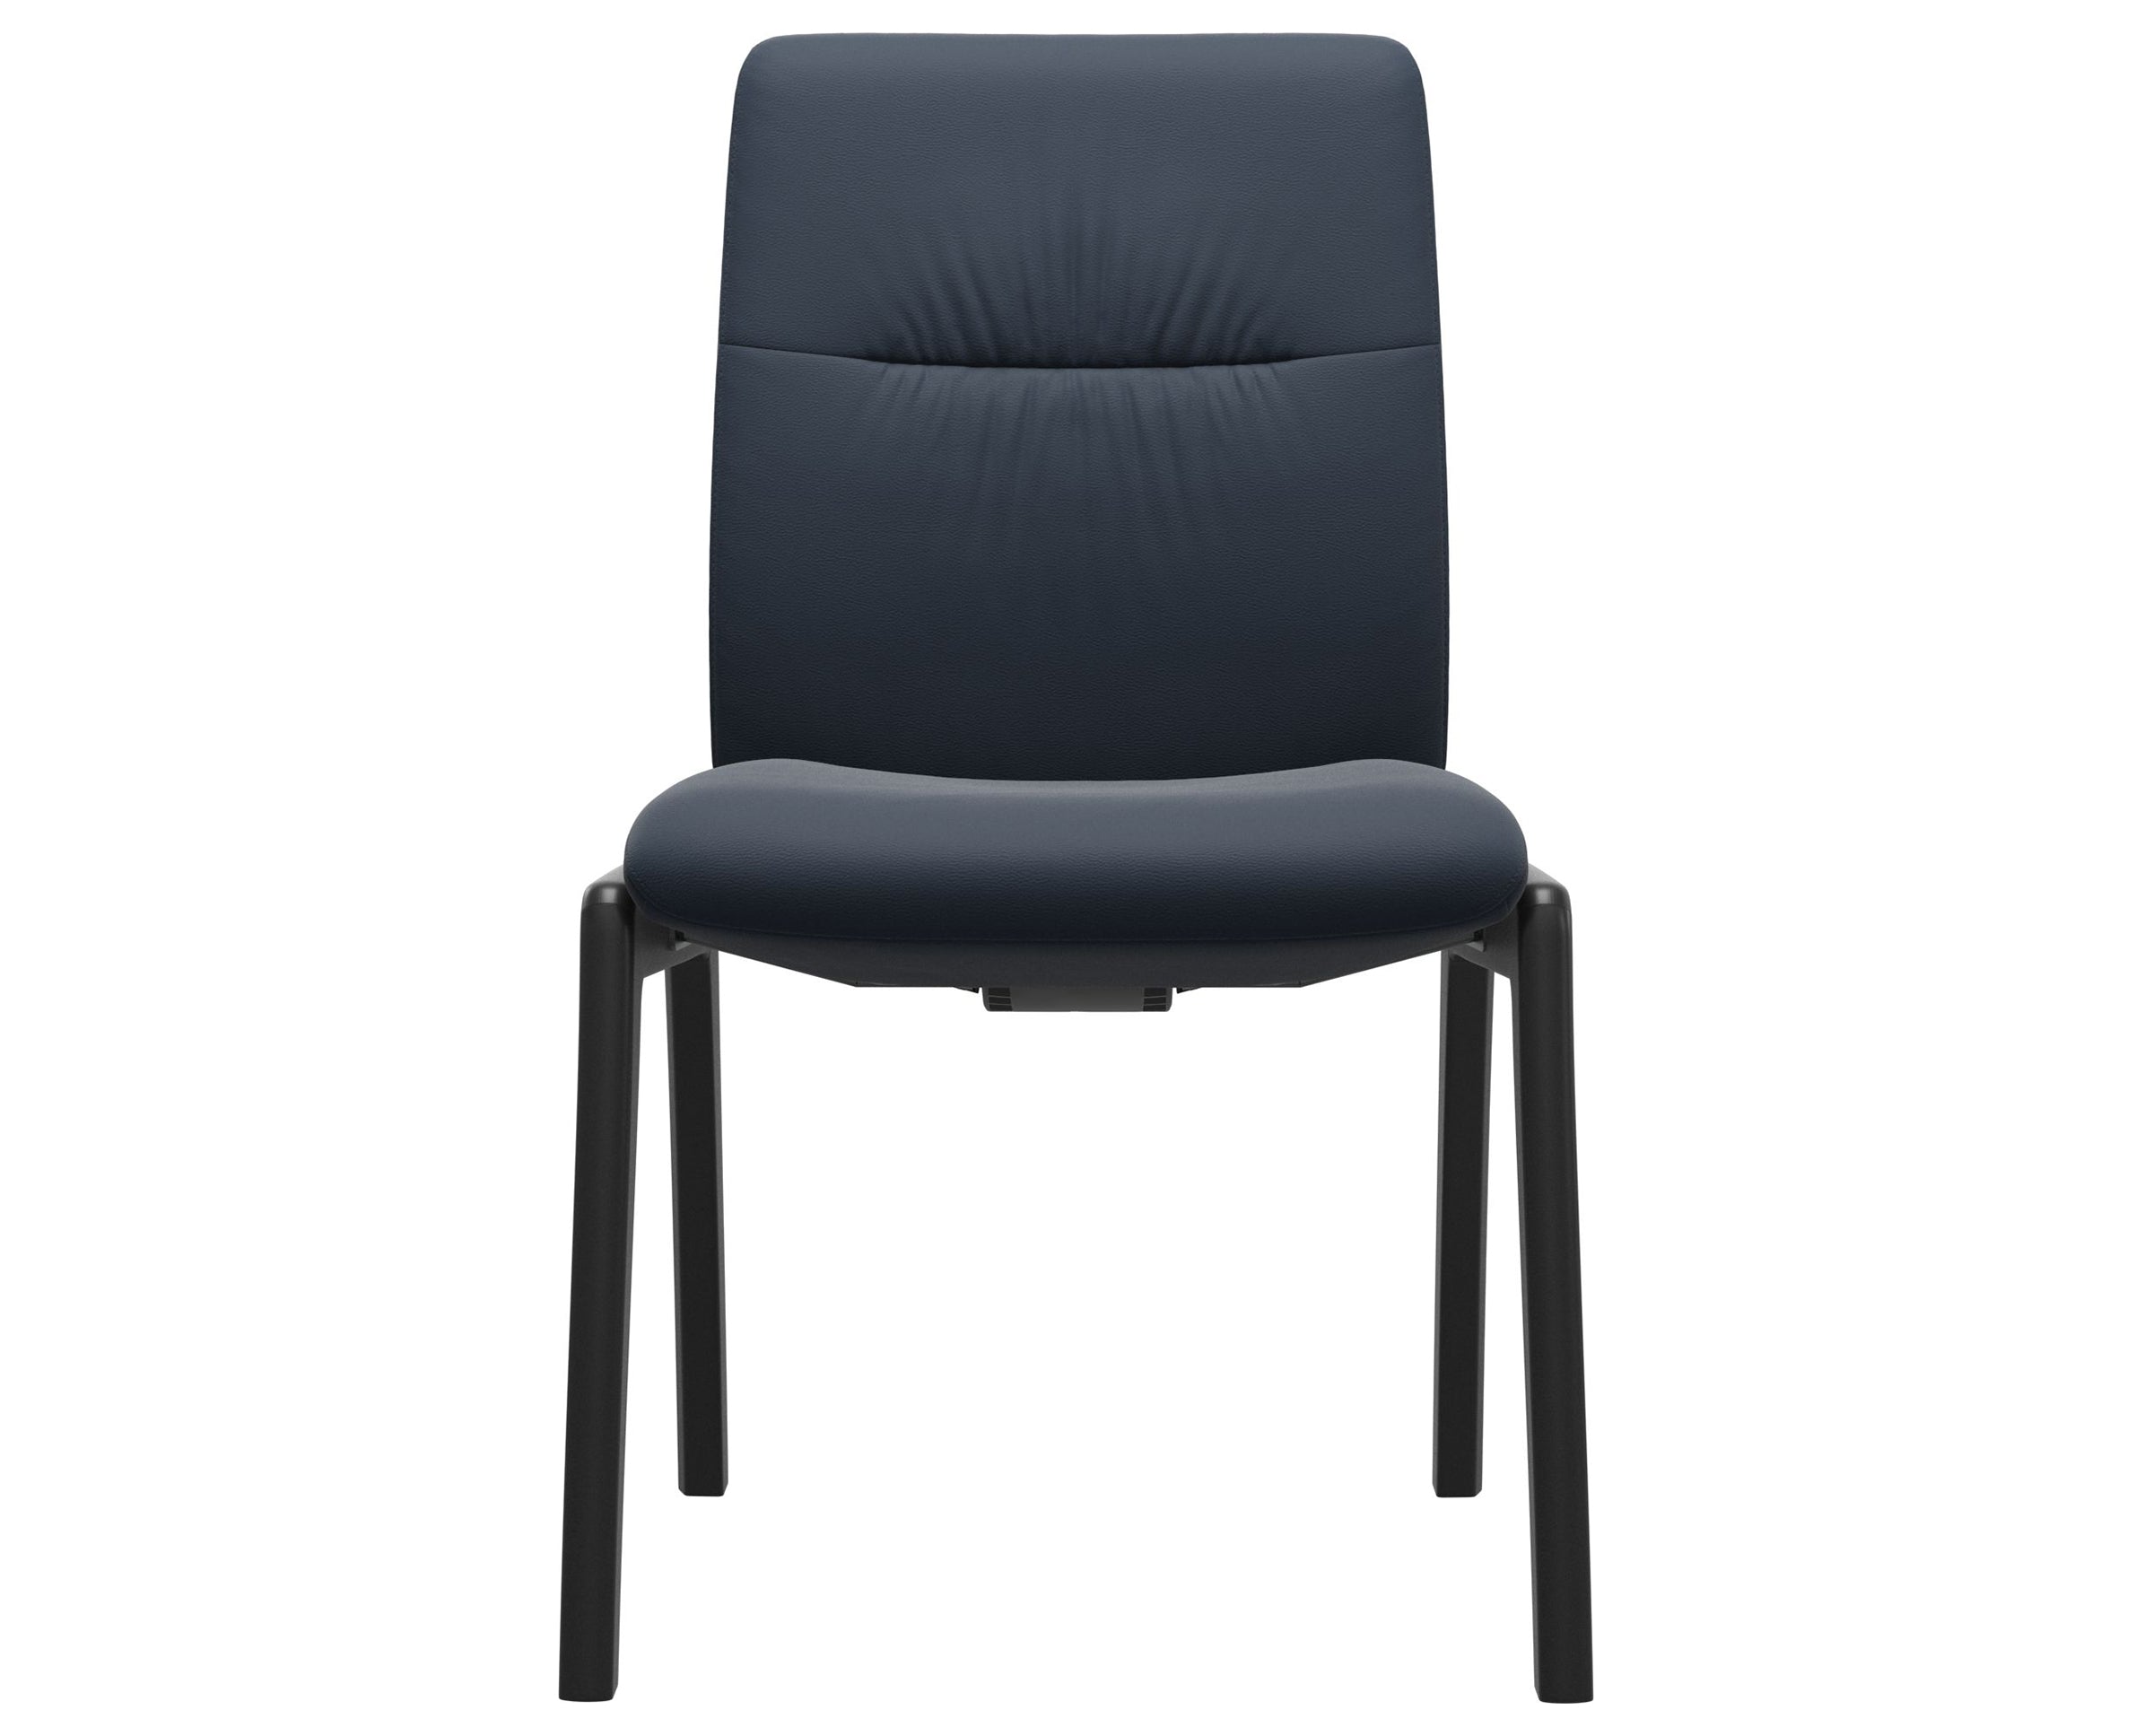 Paloma Leather Oxford Blue and Black Base | Stressless Mint Low Back D100 Dining Chair | Valley Ridge Furniture